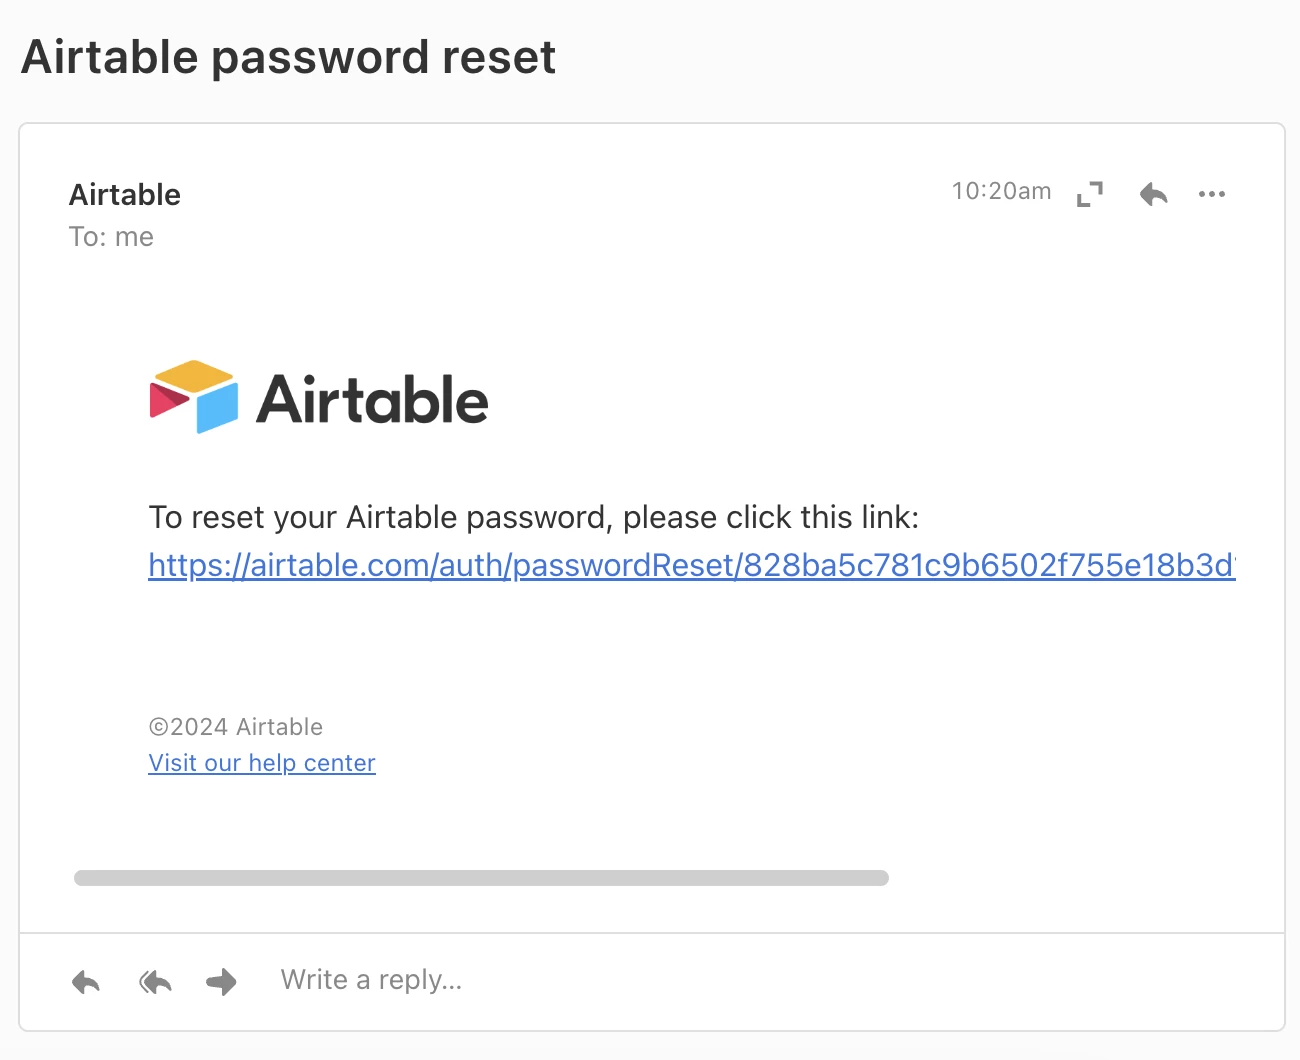 Airtable password reset email